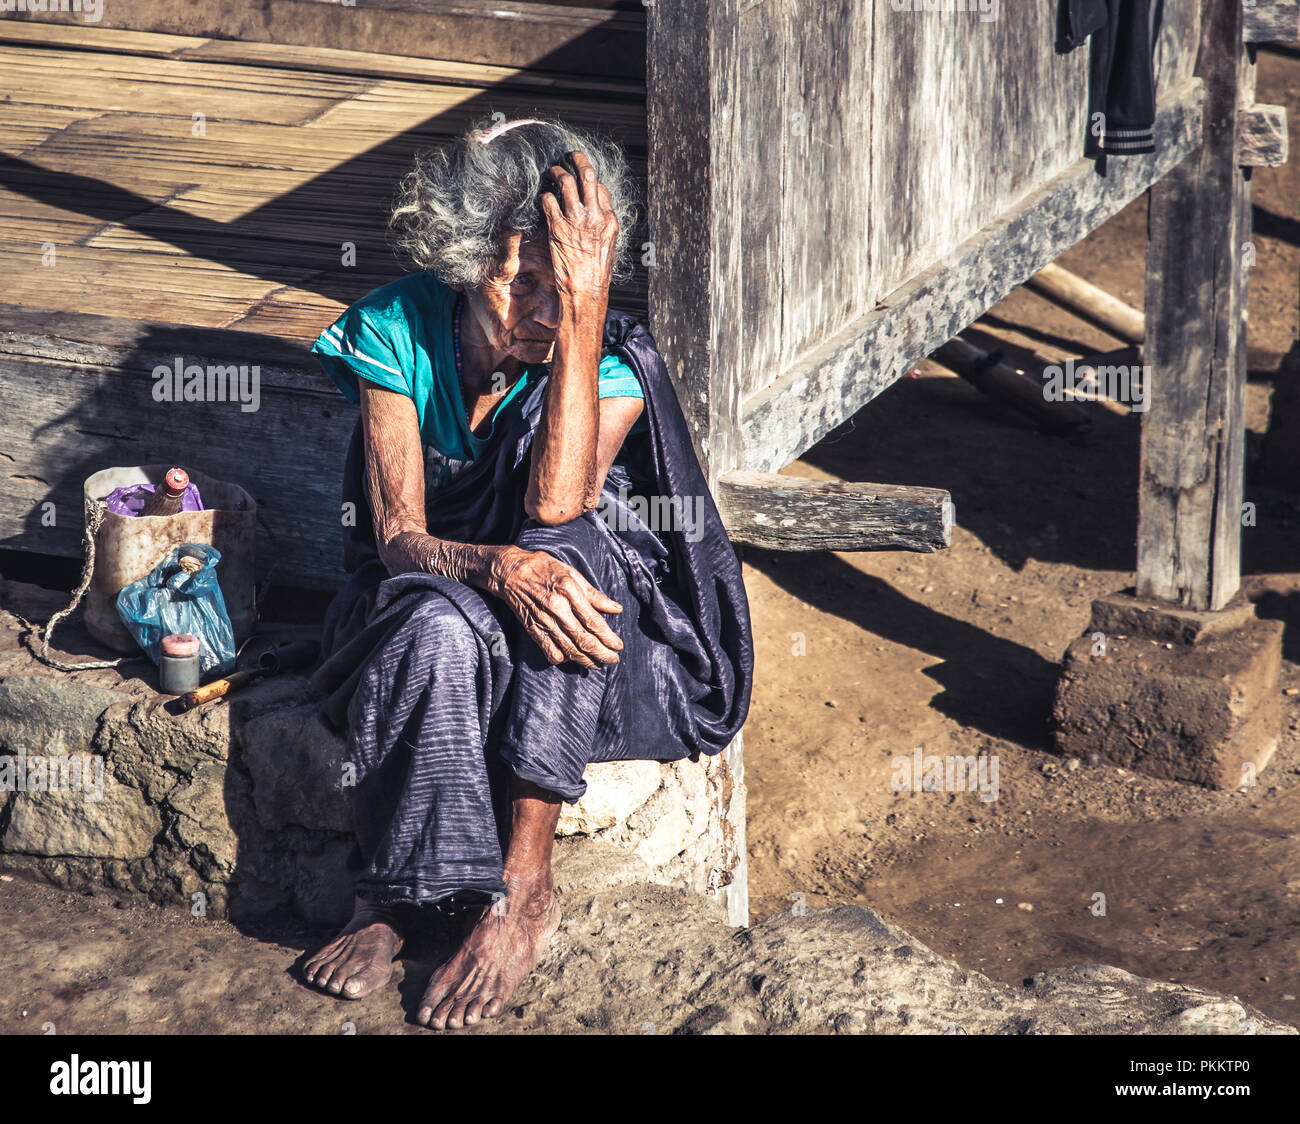 Elderly woman from the 1200 year-old Bena village near Bajawa town, on the island of Flores, shields her face from the biting sun. Stock Photo